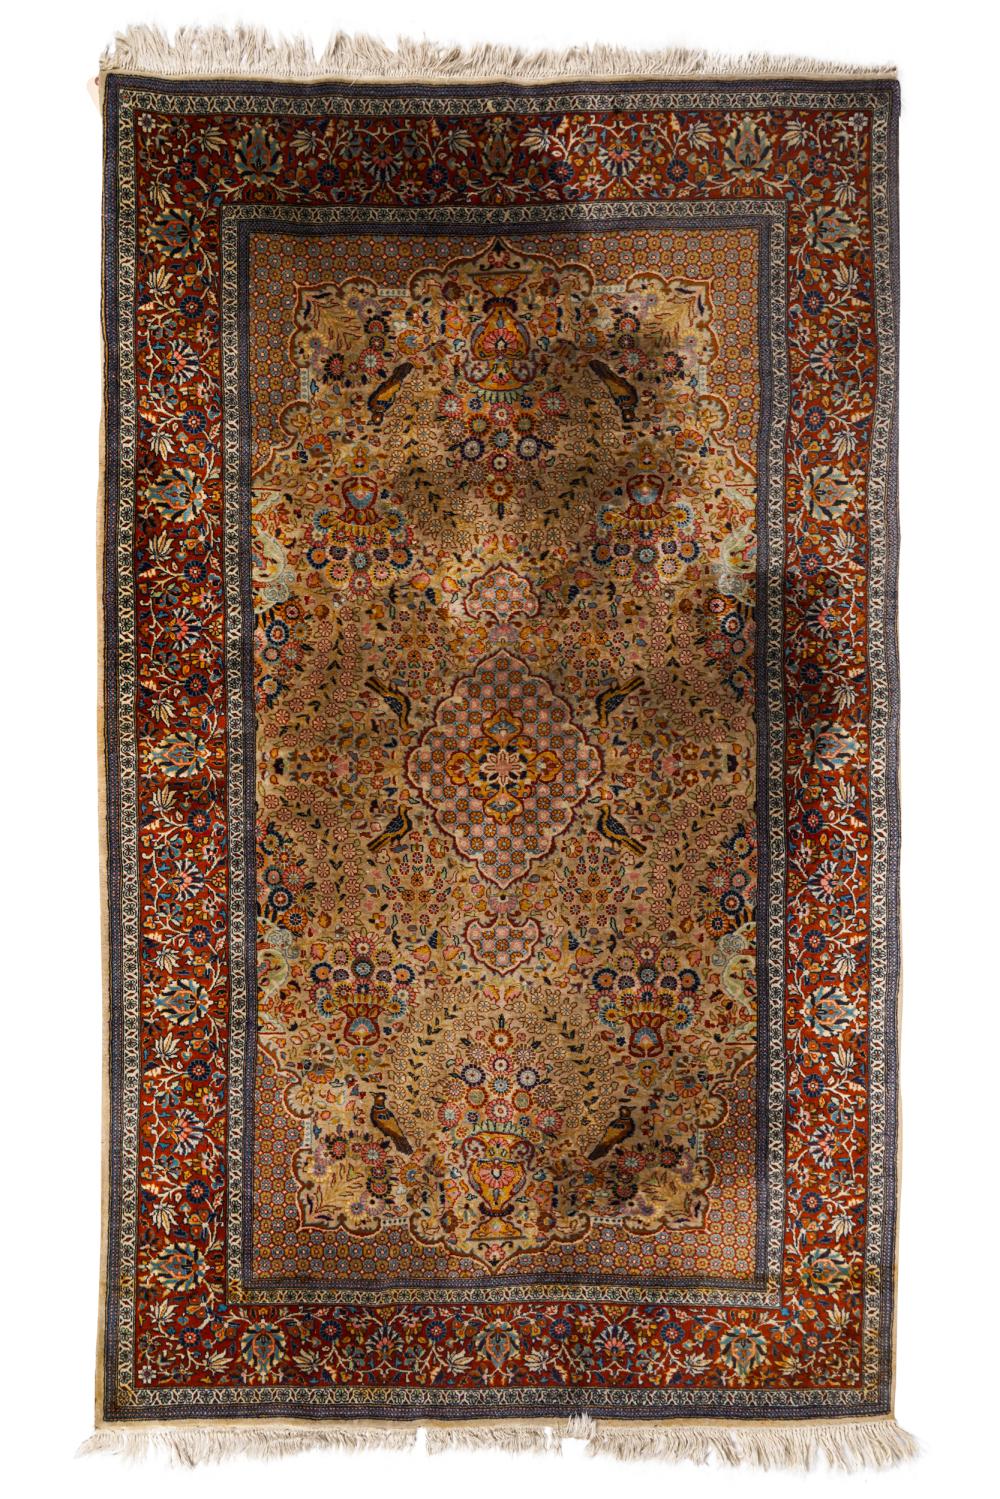 INDO-PERSIAN THROW RUGdepicting